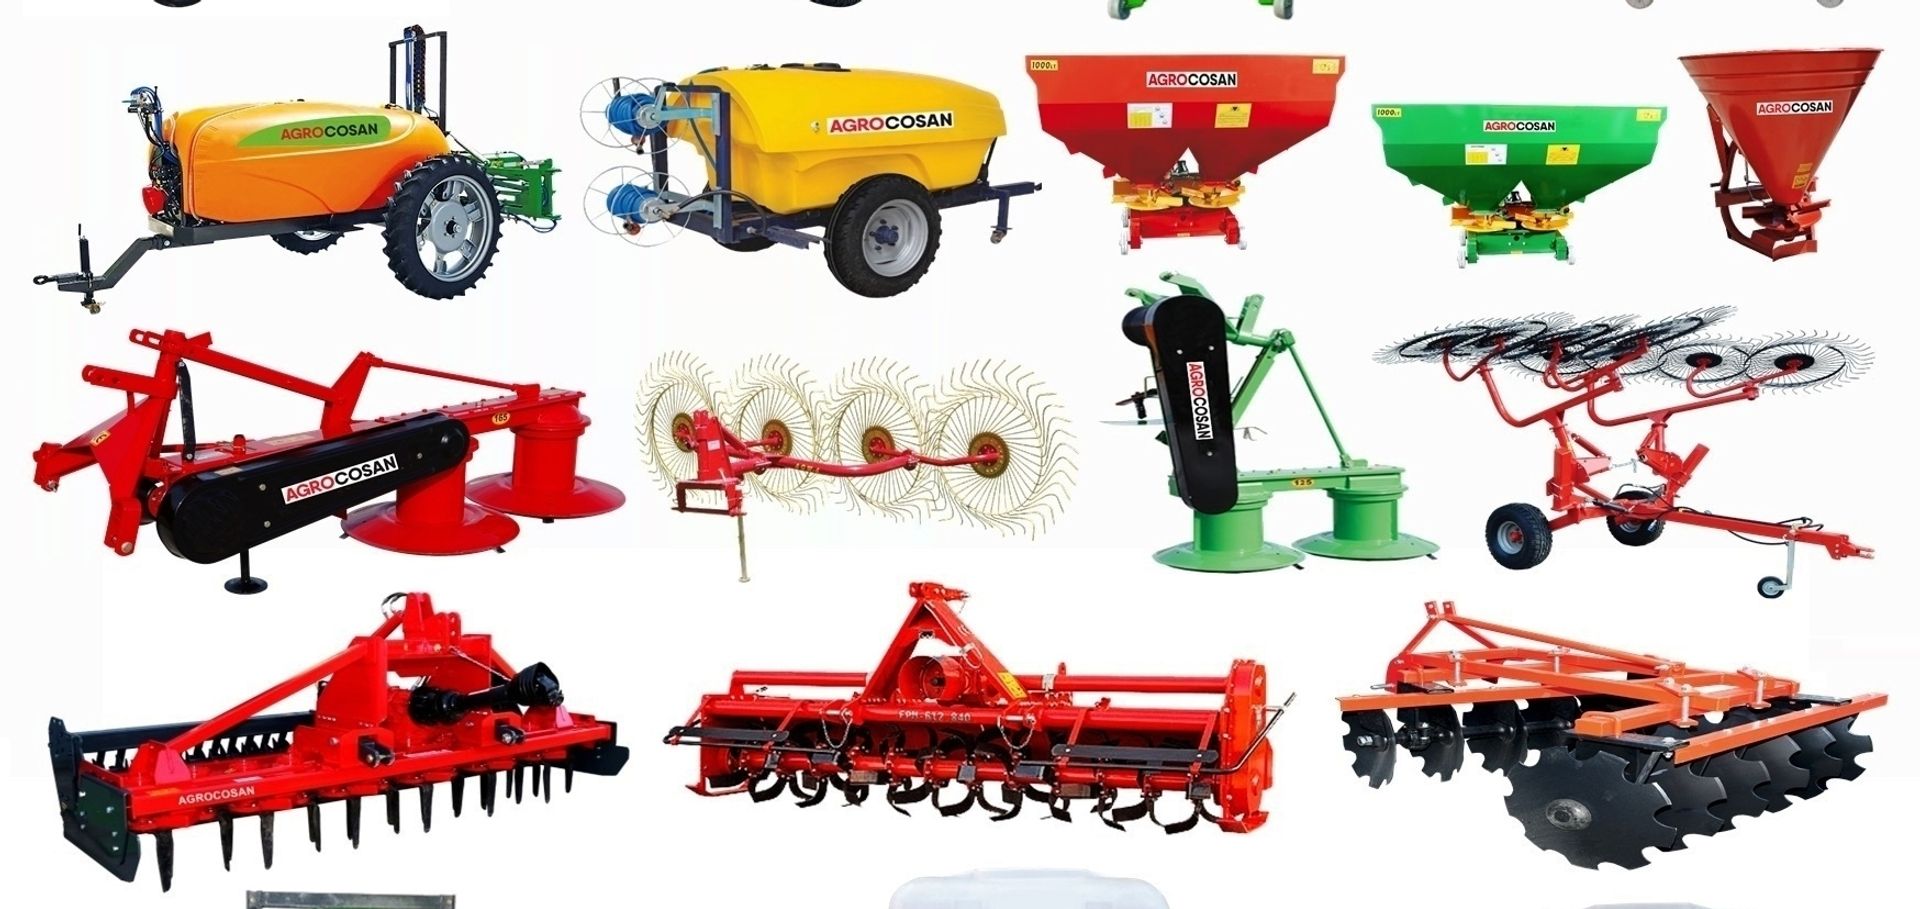 Agrocosan Agricultural Machinery